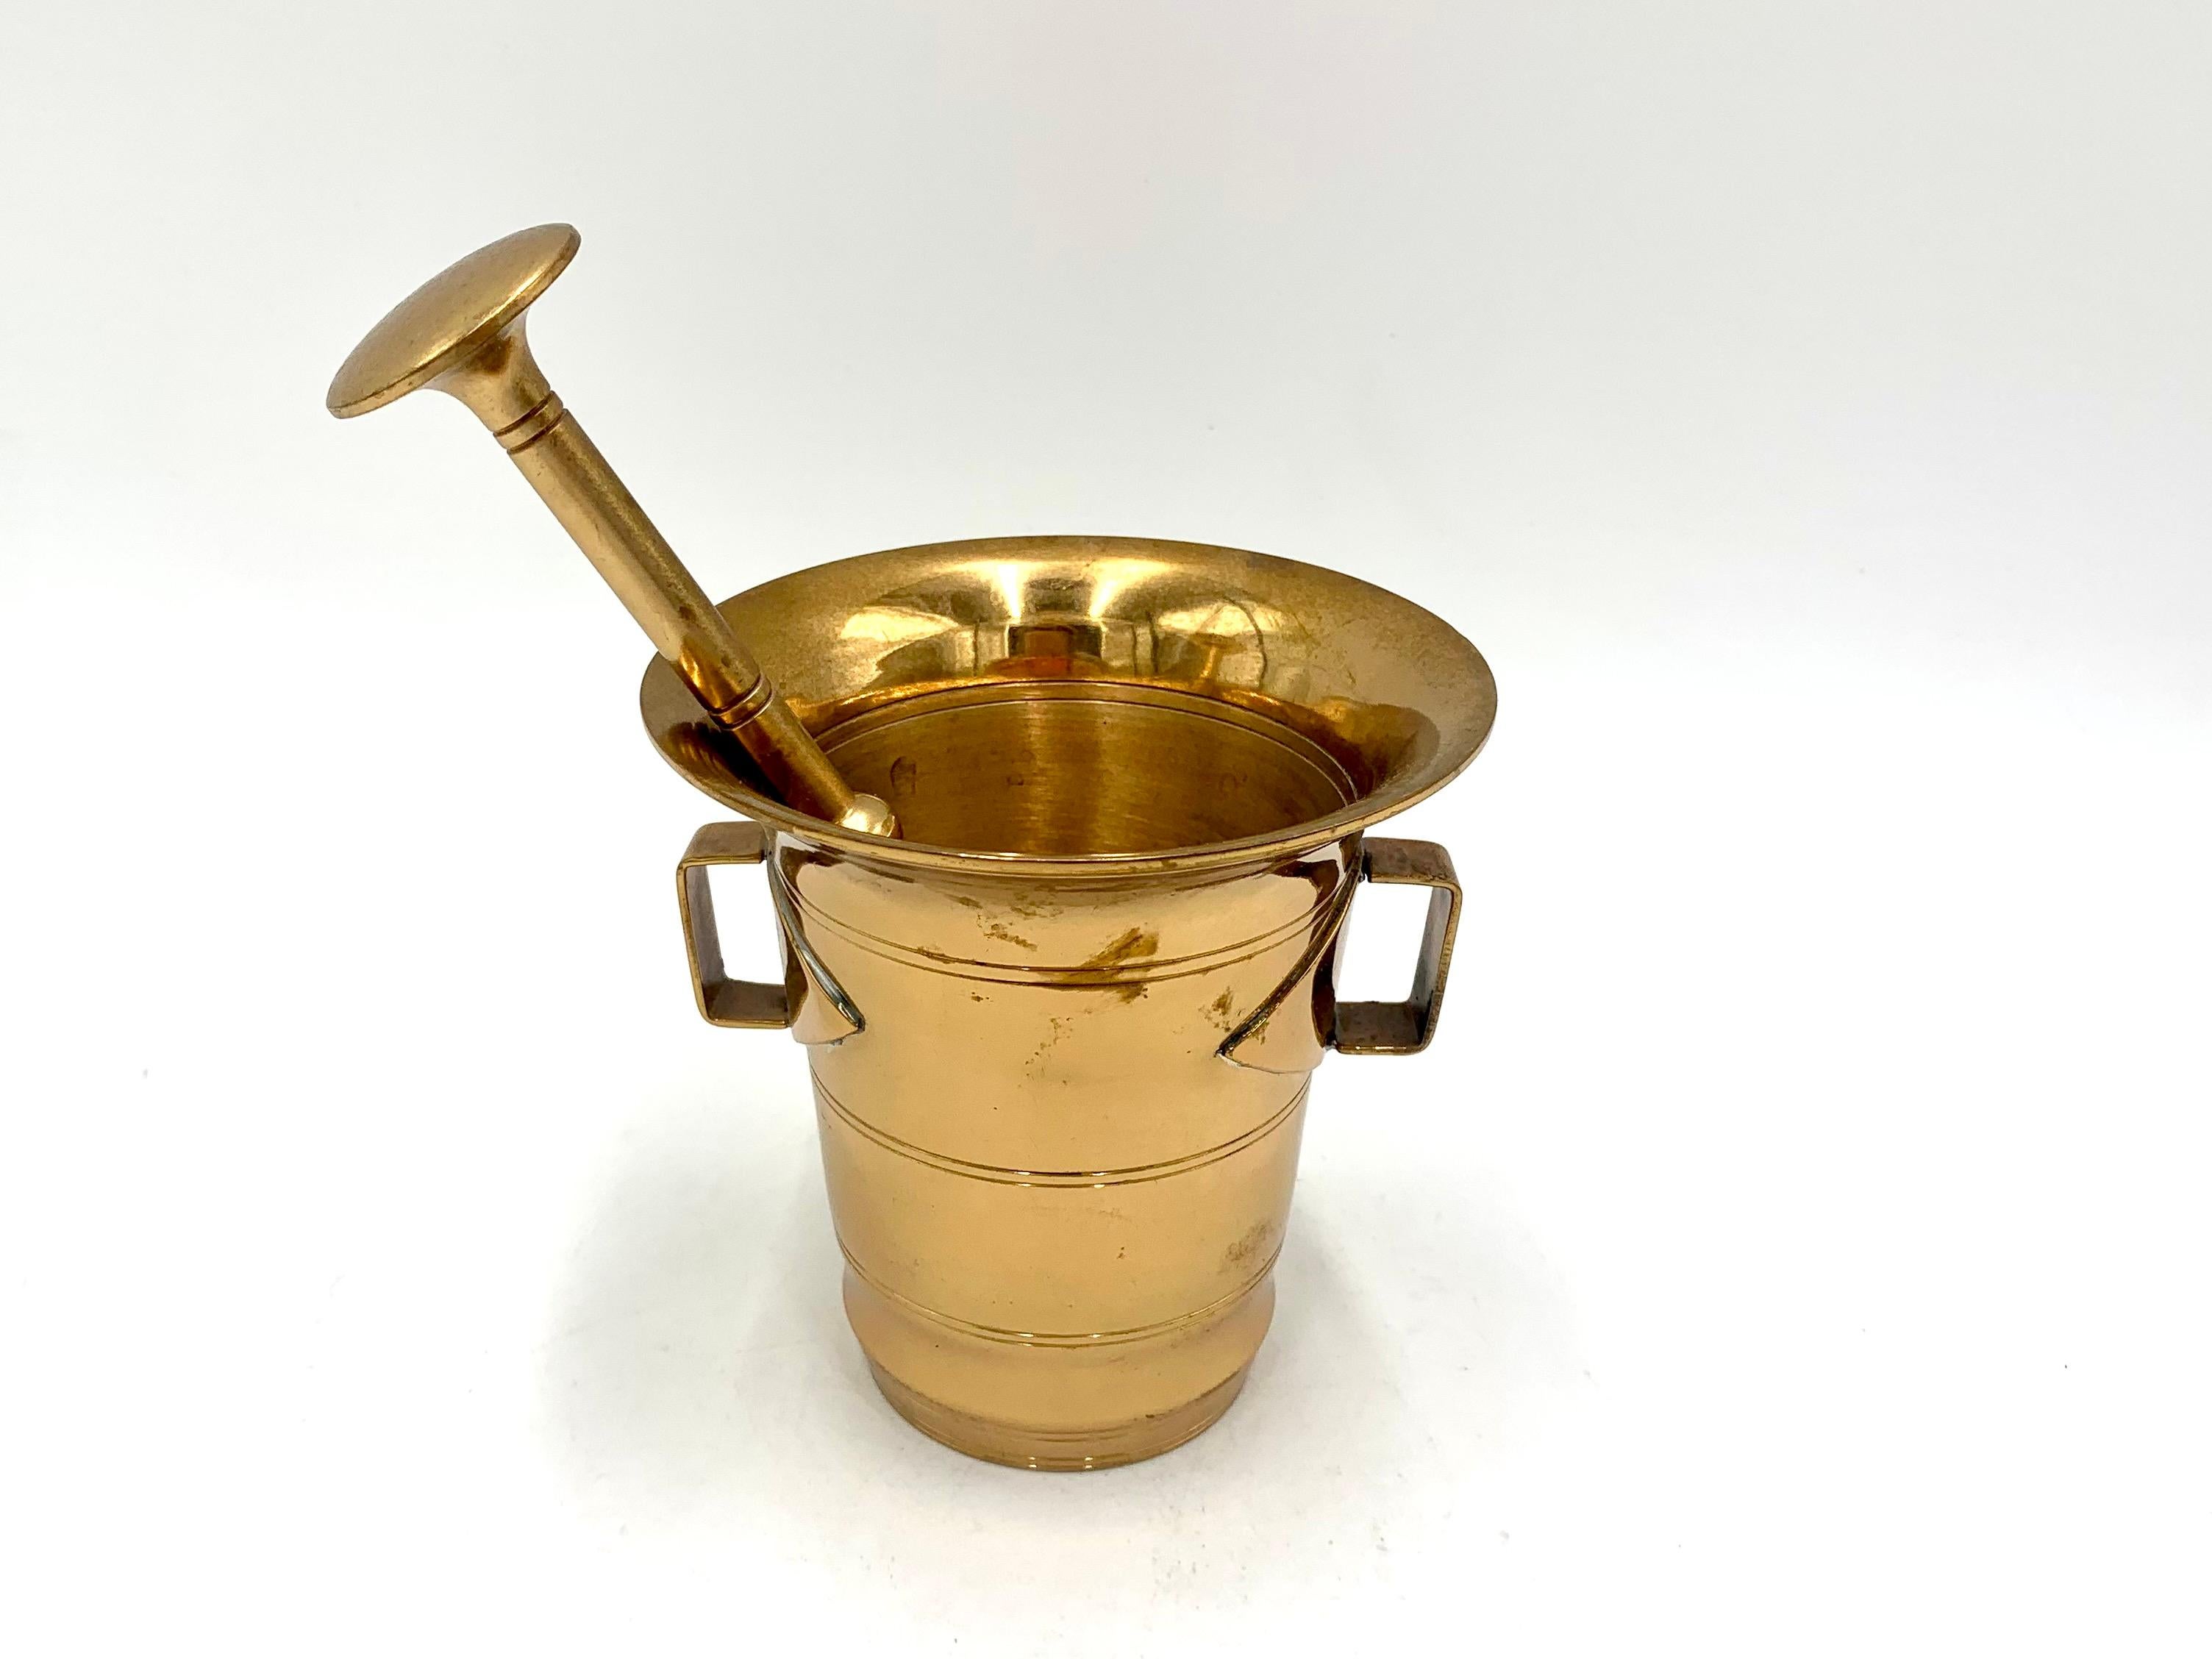 Copper mortar and pestle
Measures: height 10.5 cm diameter 10,5cm
very good condition.
 